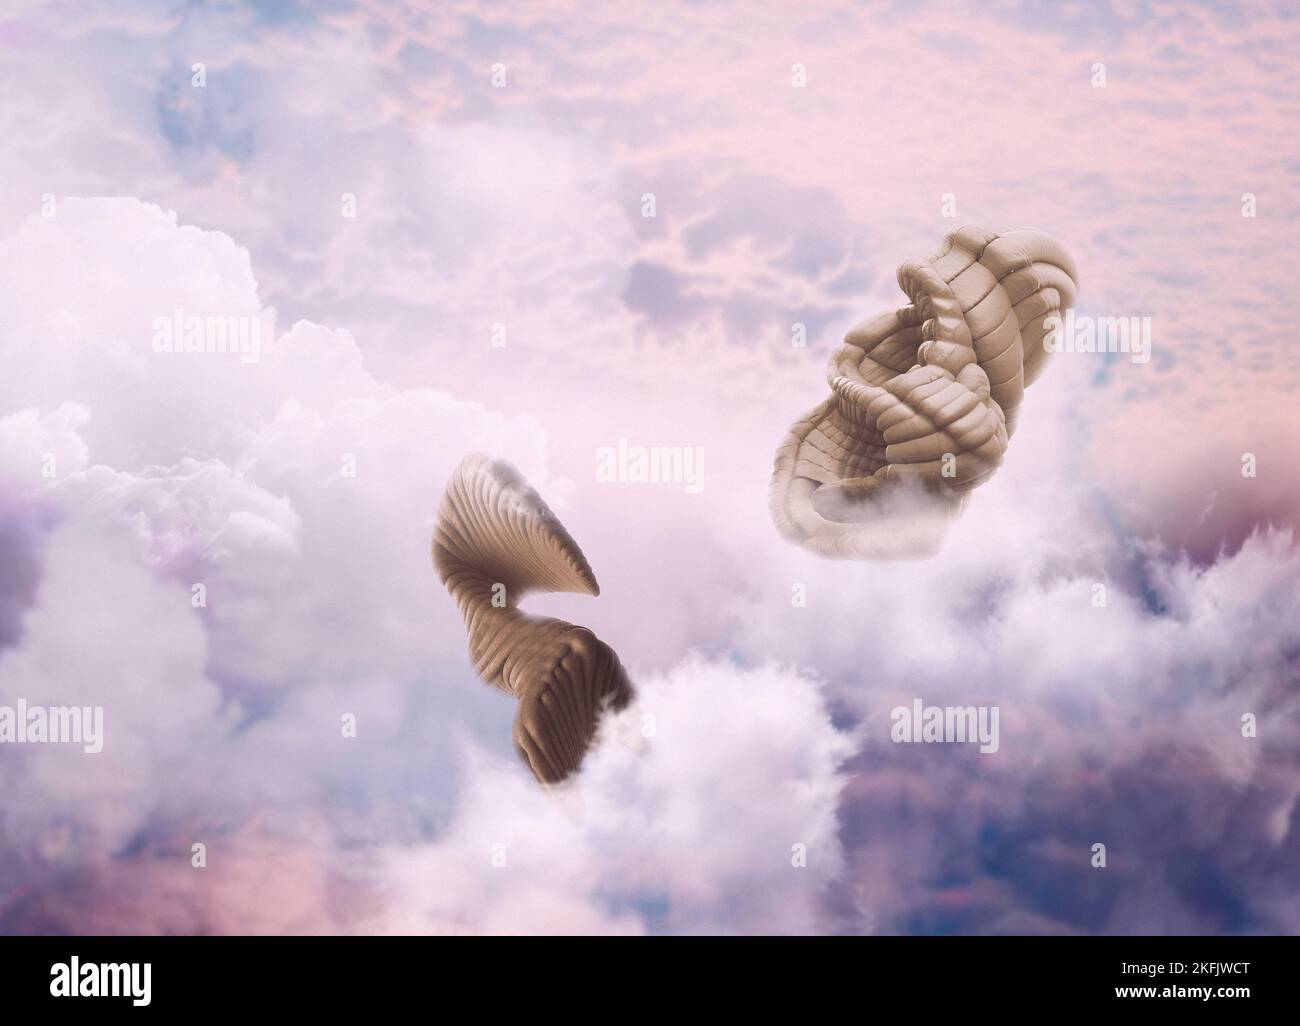 Aliens that live in clouds of gas planets, illustration Stock Photo